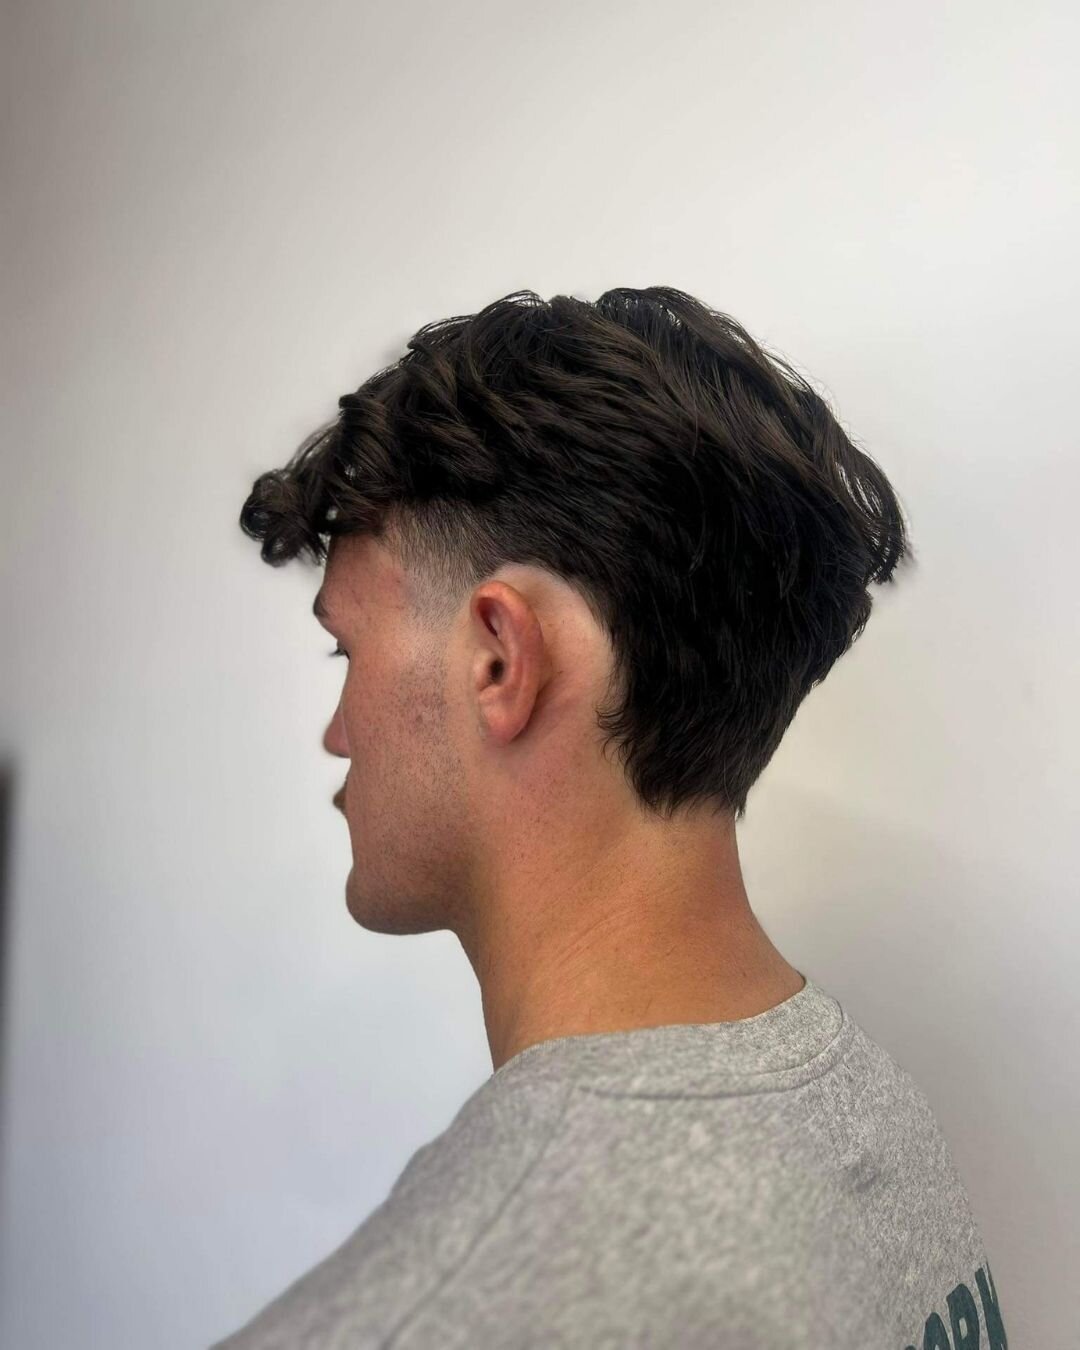 Stylish cutting skills by Benshi at his private barber cutting course this week 🤩

Would you like your next cut with Benshi? Book online or call us on 03 442 0515 😊

@benshi_latin_hairdresser66_nz

#hairdressing #menscut #barber #hairstyle #hair #h